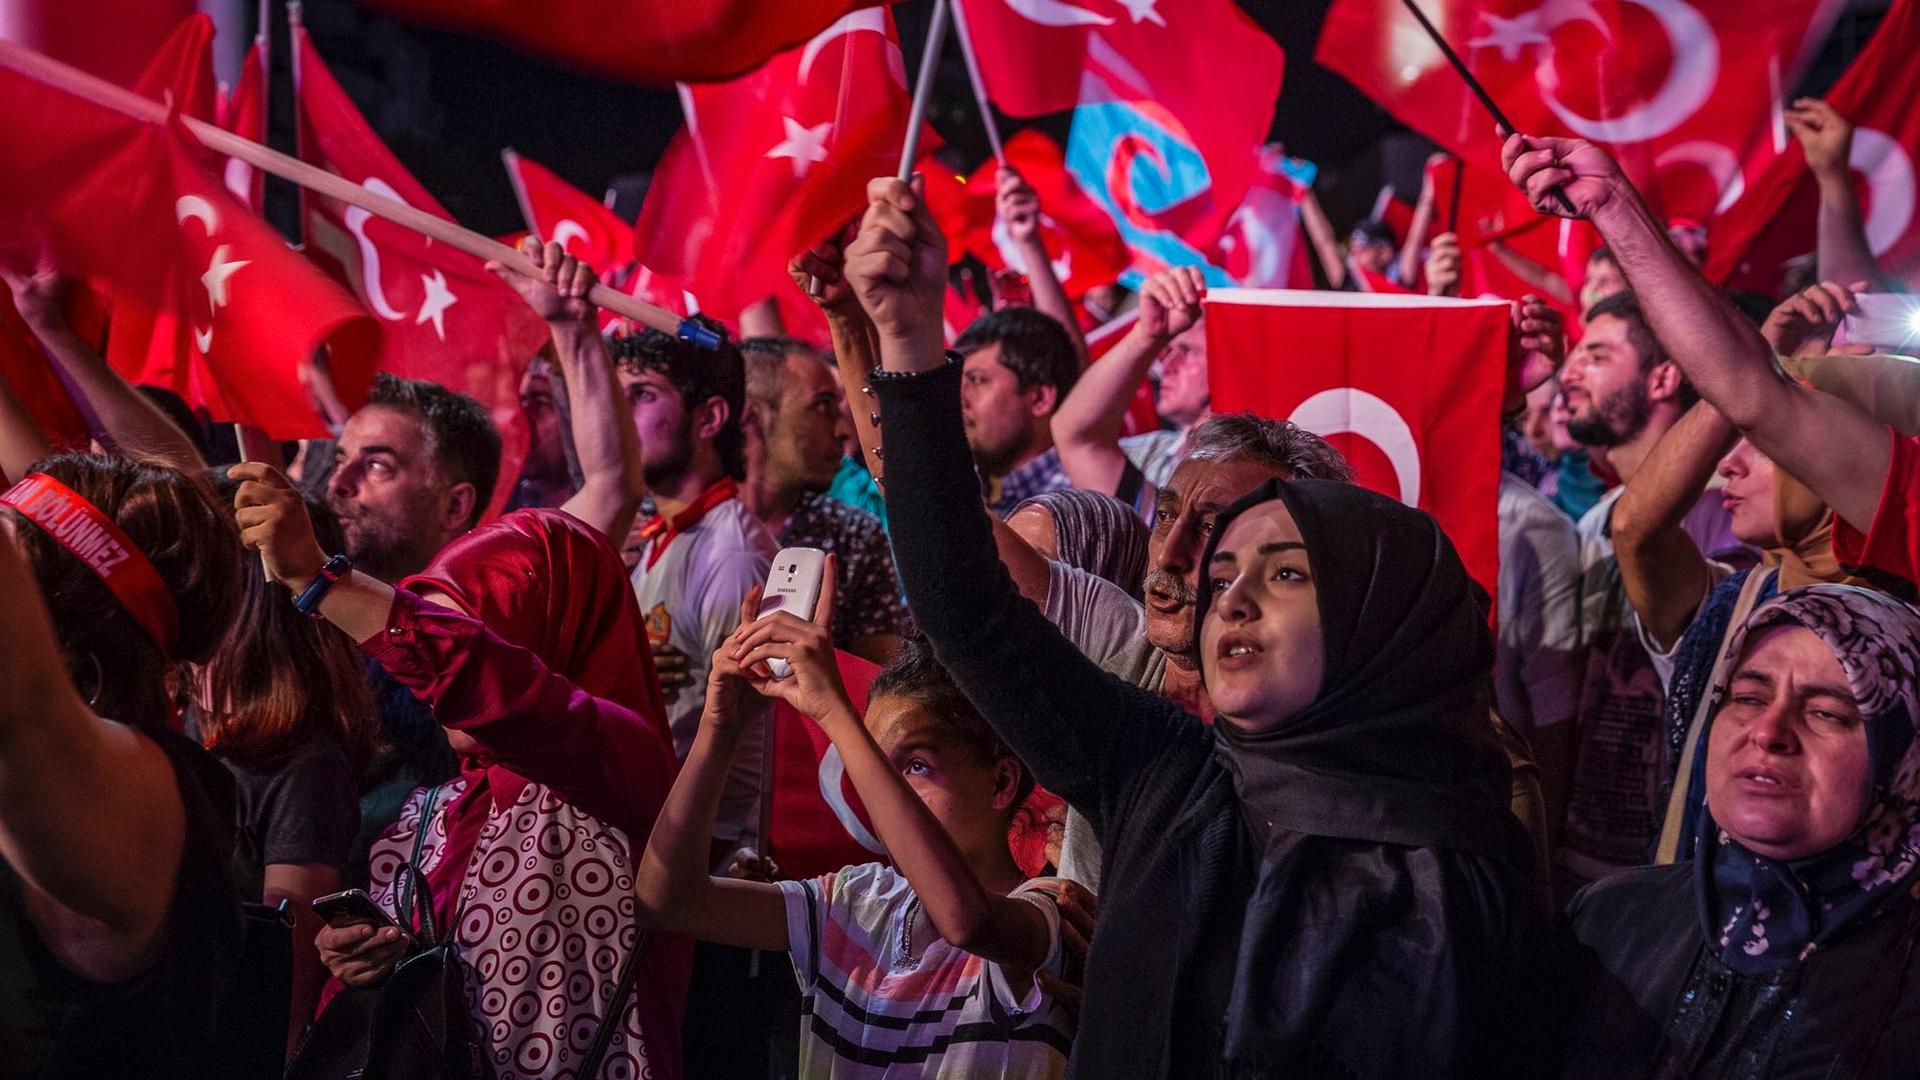 President Recep Tayyip Erdoğan's supporters rally in Istanbul in 2016 following the failed coup.